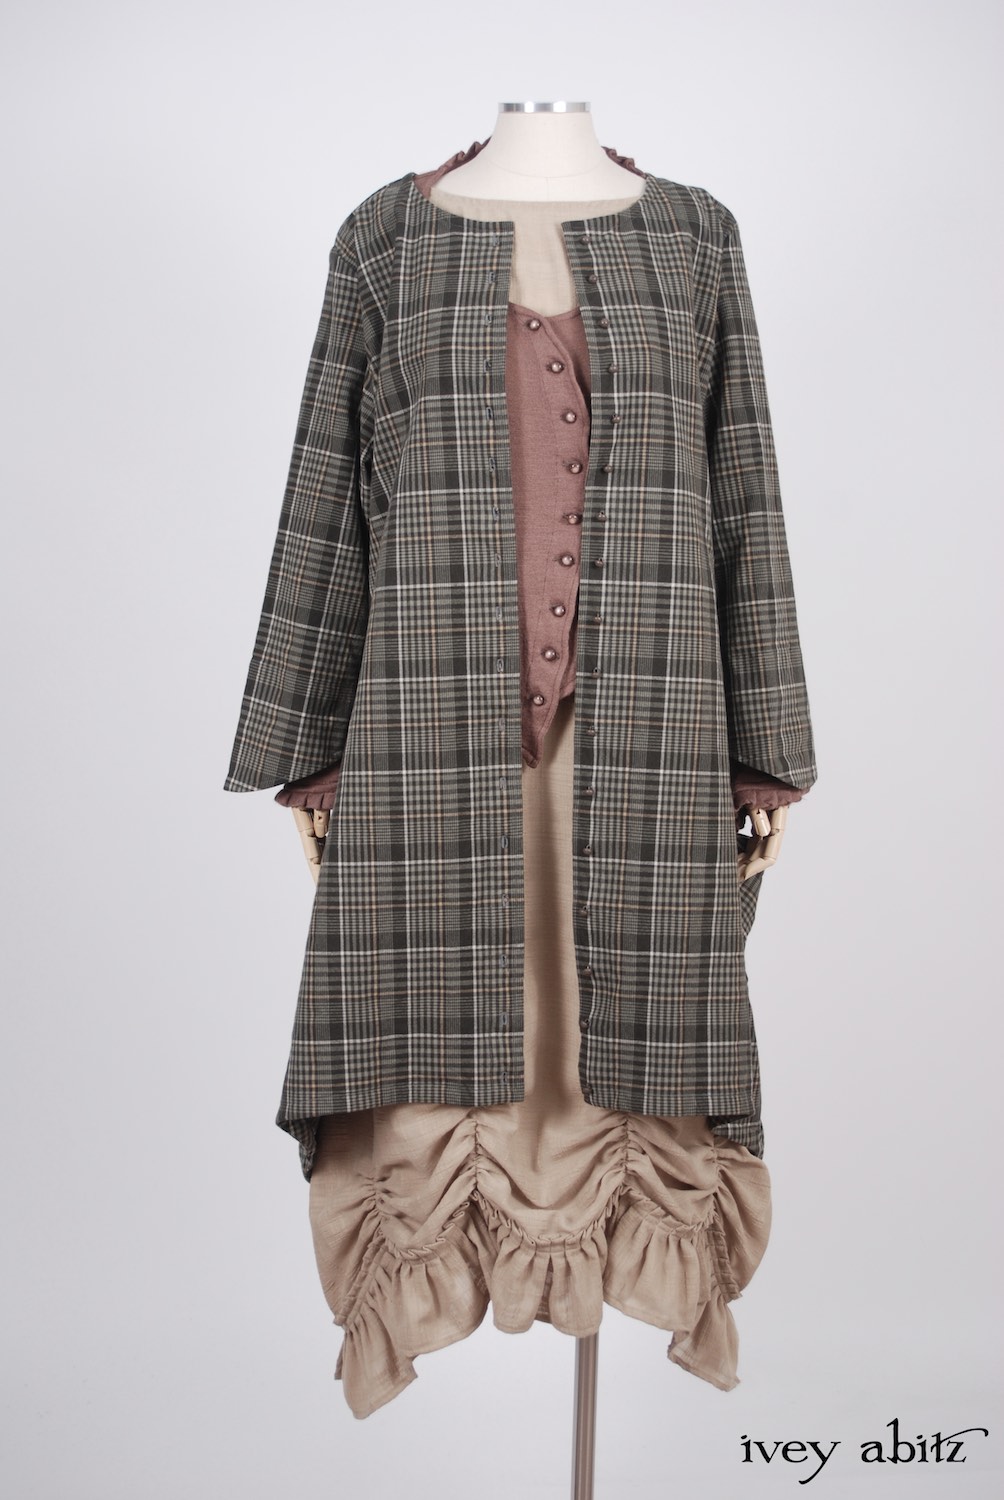 Ivey Abitz - Wildefield Duster Coat in Meadow Stretchy Plaid Cotton, High Water Length - Canterbury Cardigan in Blushed Cashmere Knit  - Edenshire Frock in Blushed Plaid Weave, High Water Length